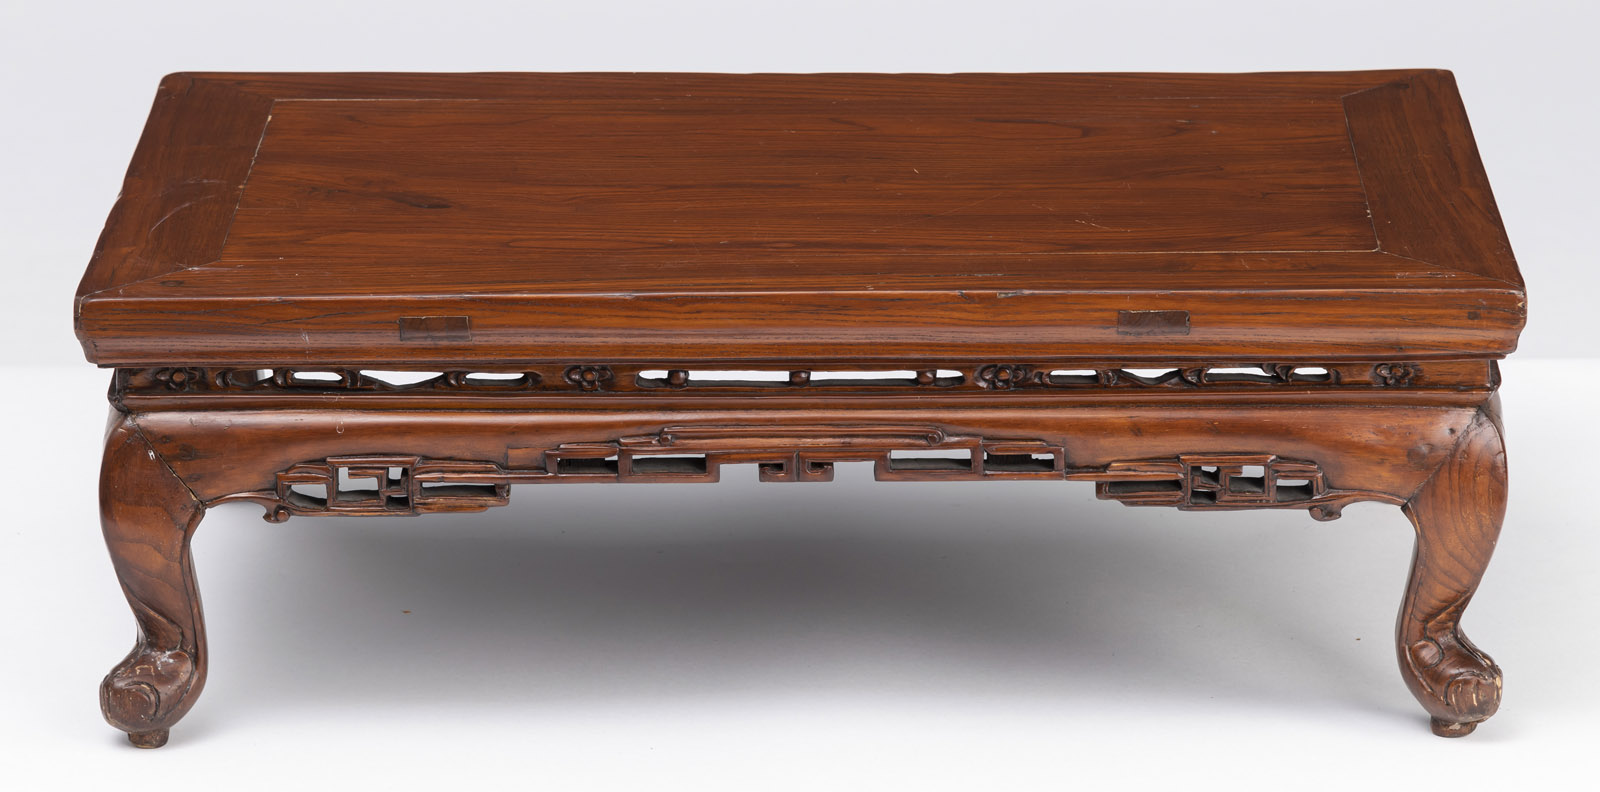 A WOODEN KANG TABLE WITH CURVED LEGS AND PARTLY IN OPENWORK CARVED APRONS - Image 4 of 5